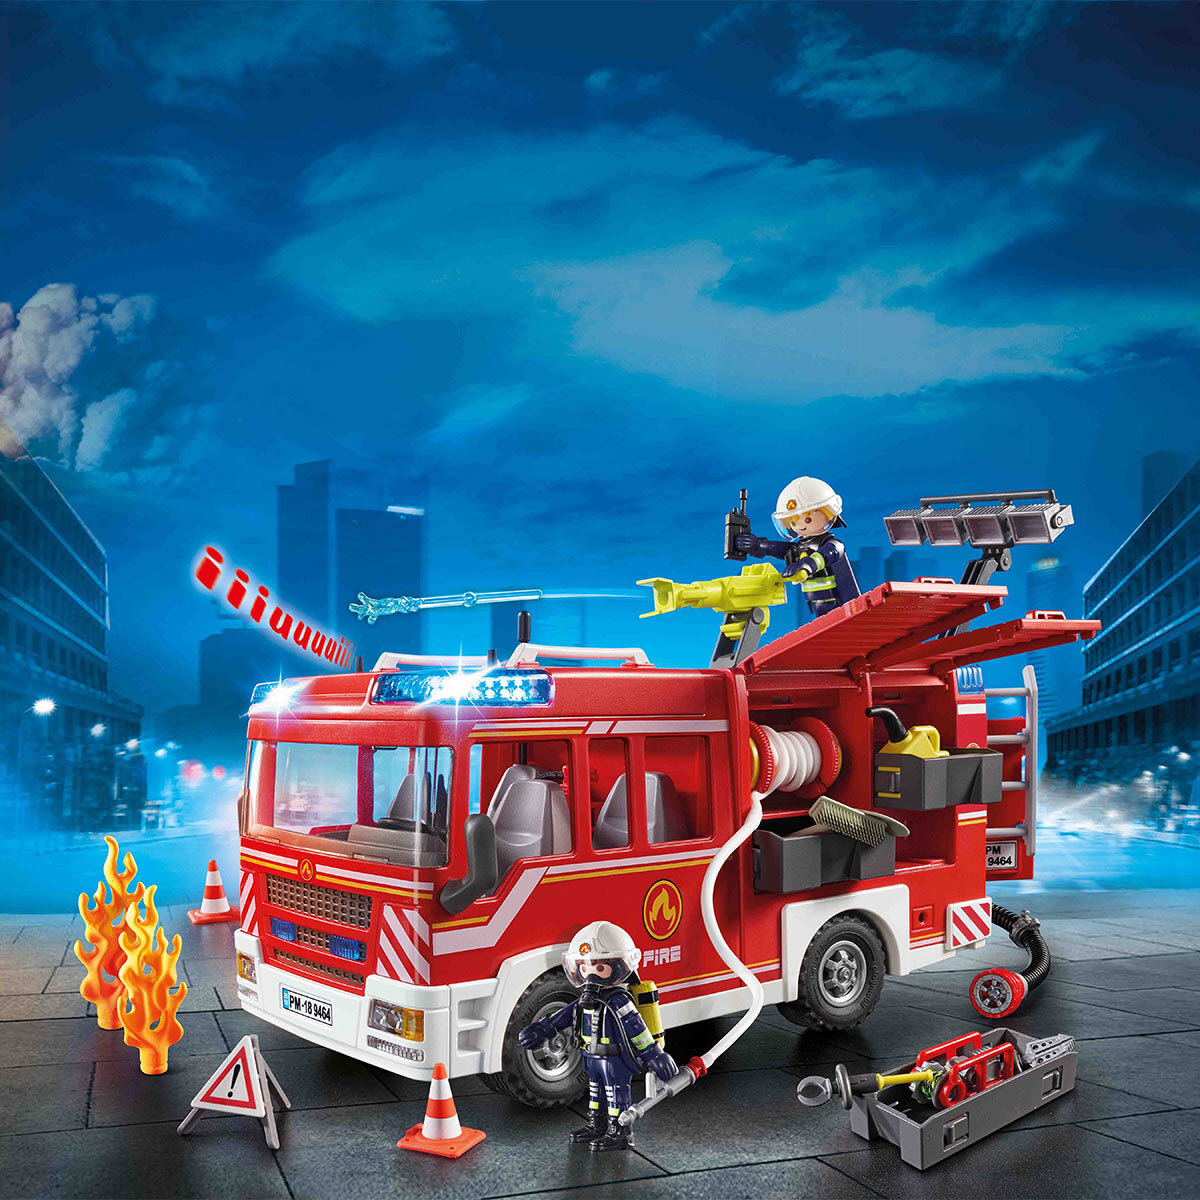 Buy Playmobil Fire Engine Overview Image at Costco.co.uk